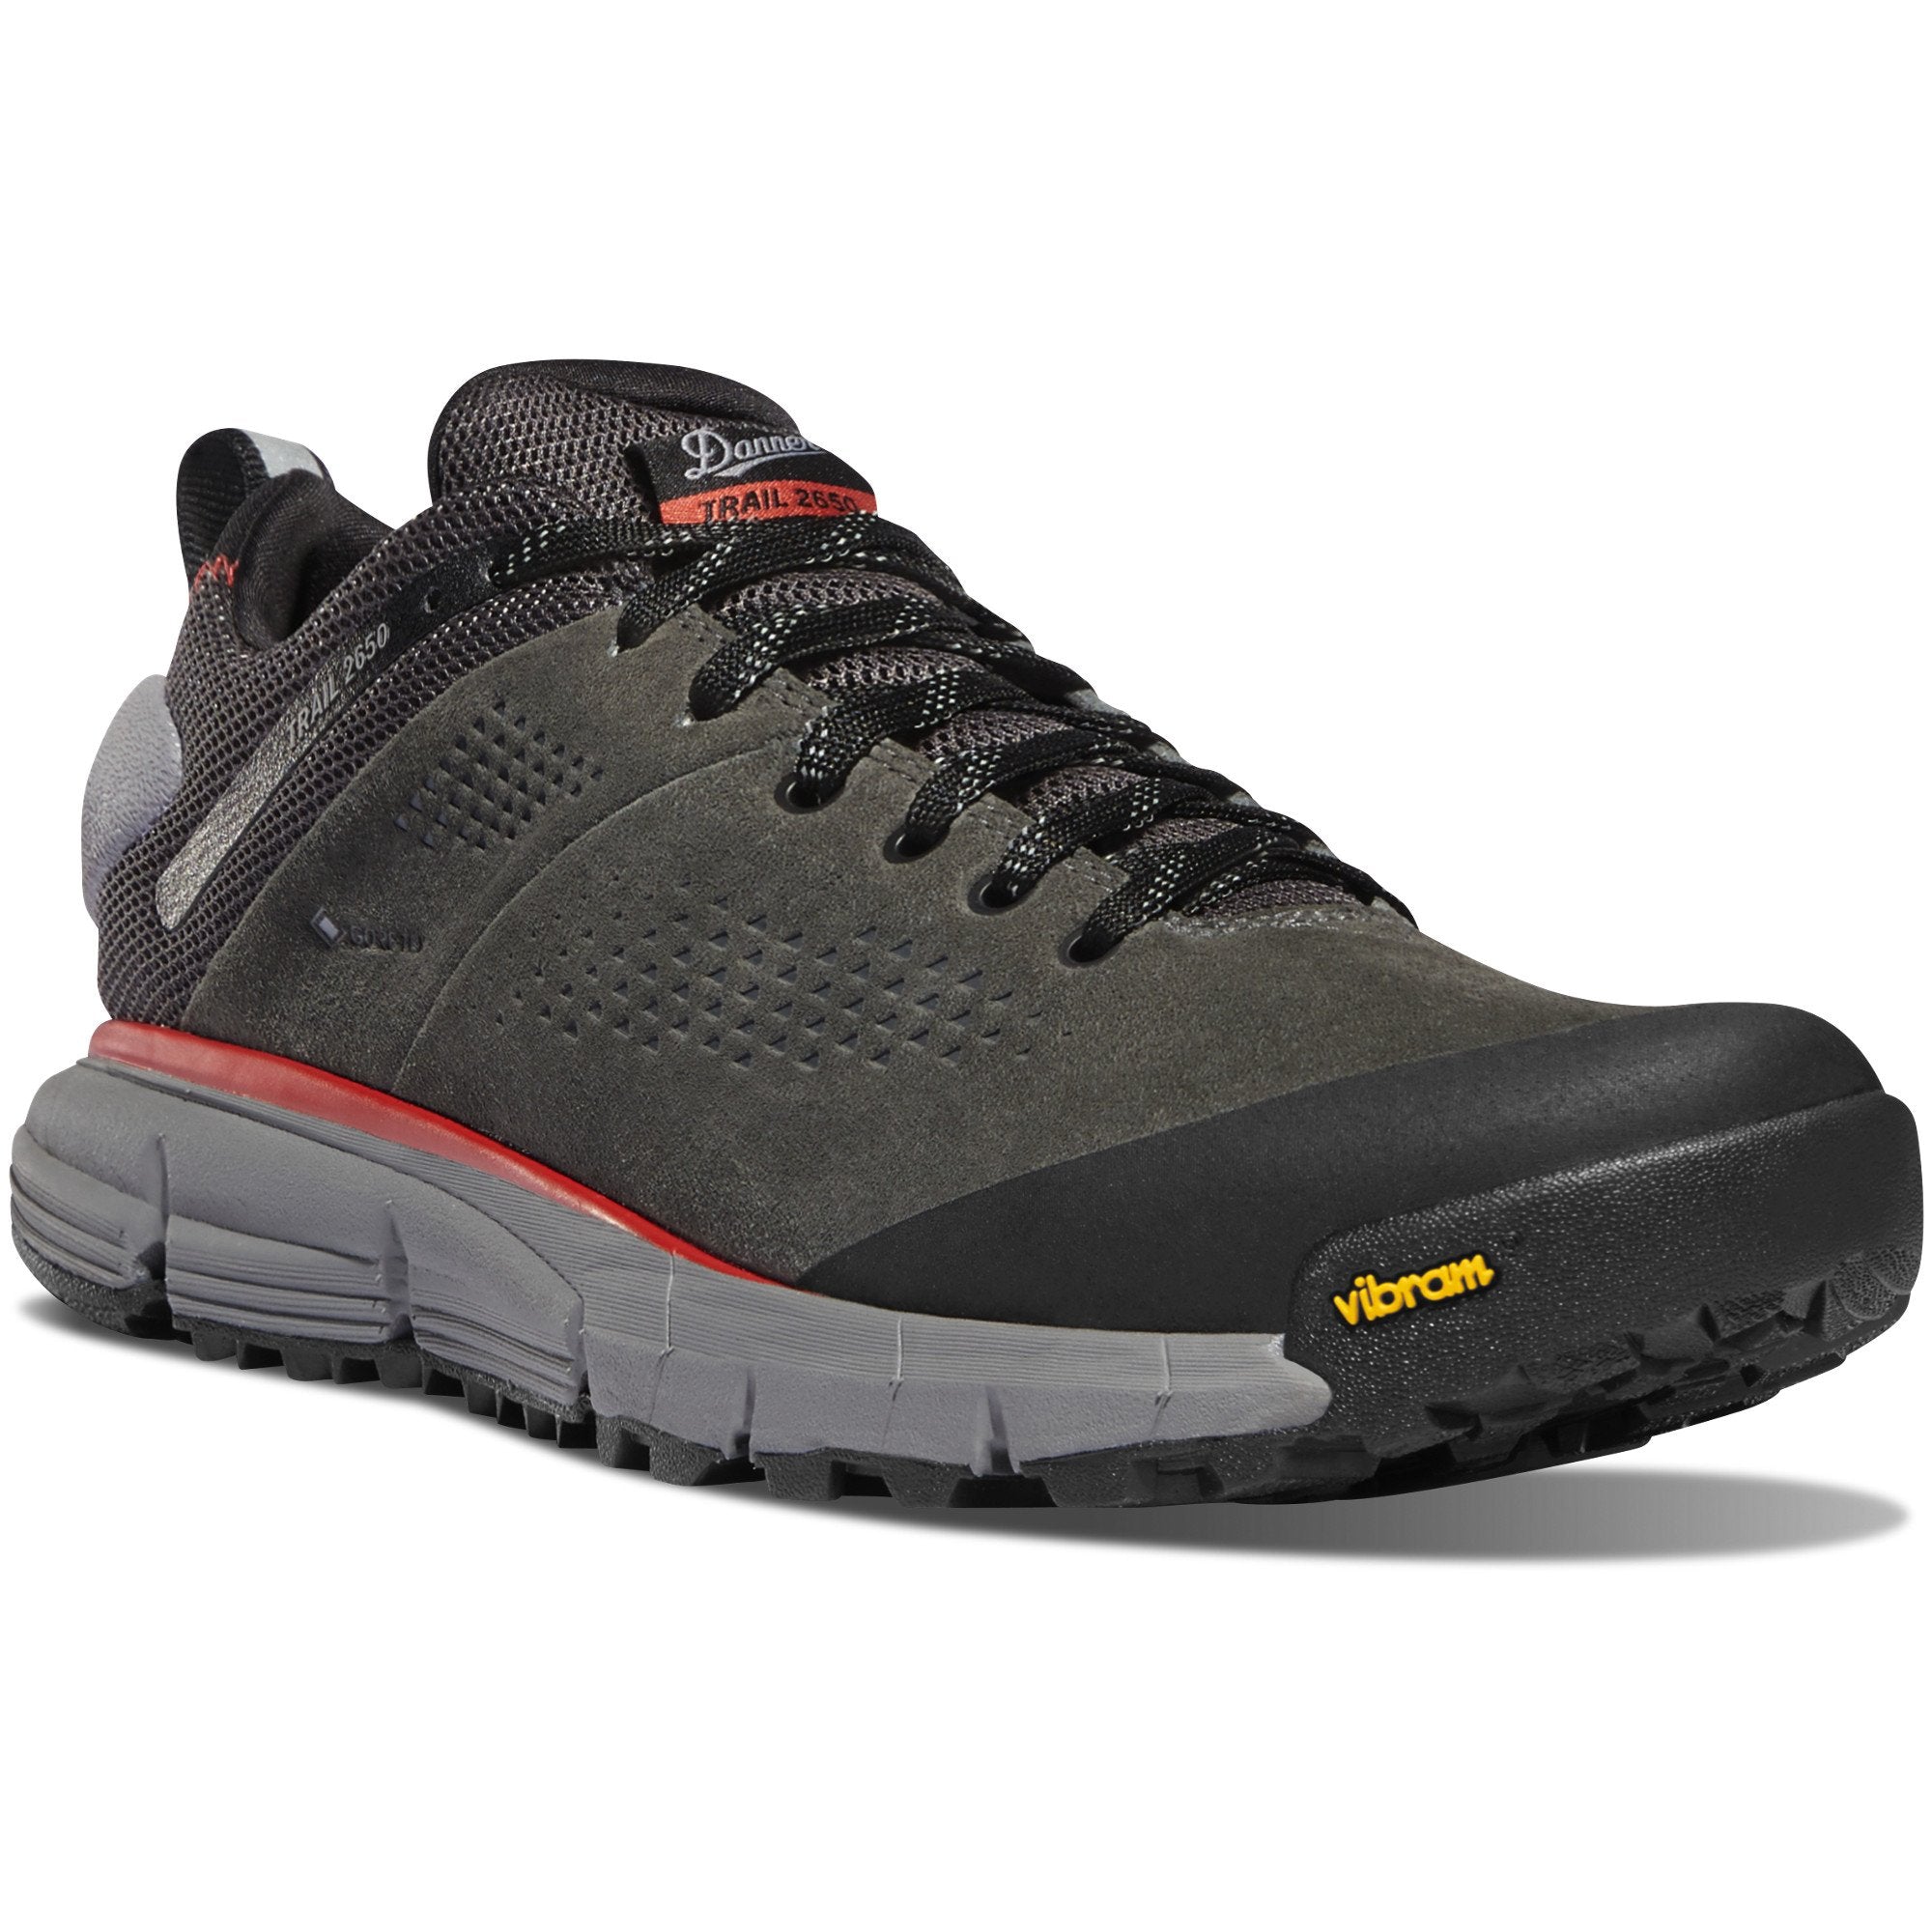 Trail 2650 3" Gore-Tex Hiking Shoe in Dark Gray/Brick Red color from the side view